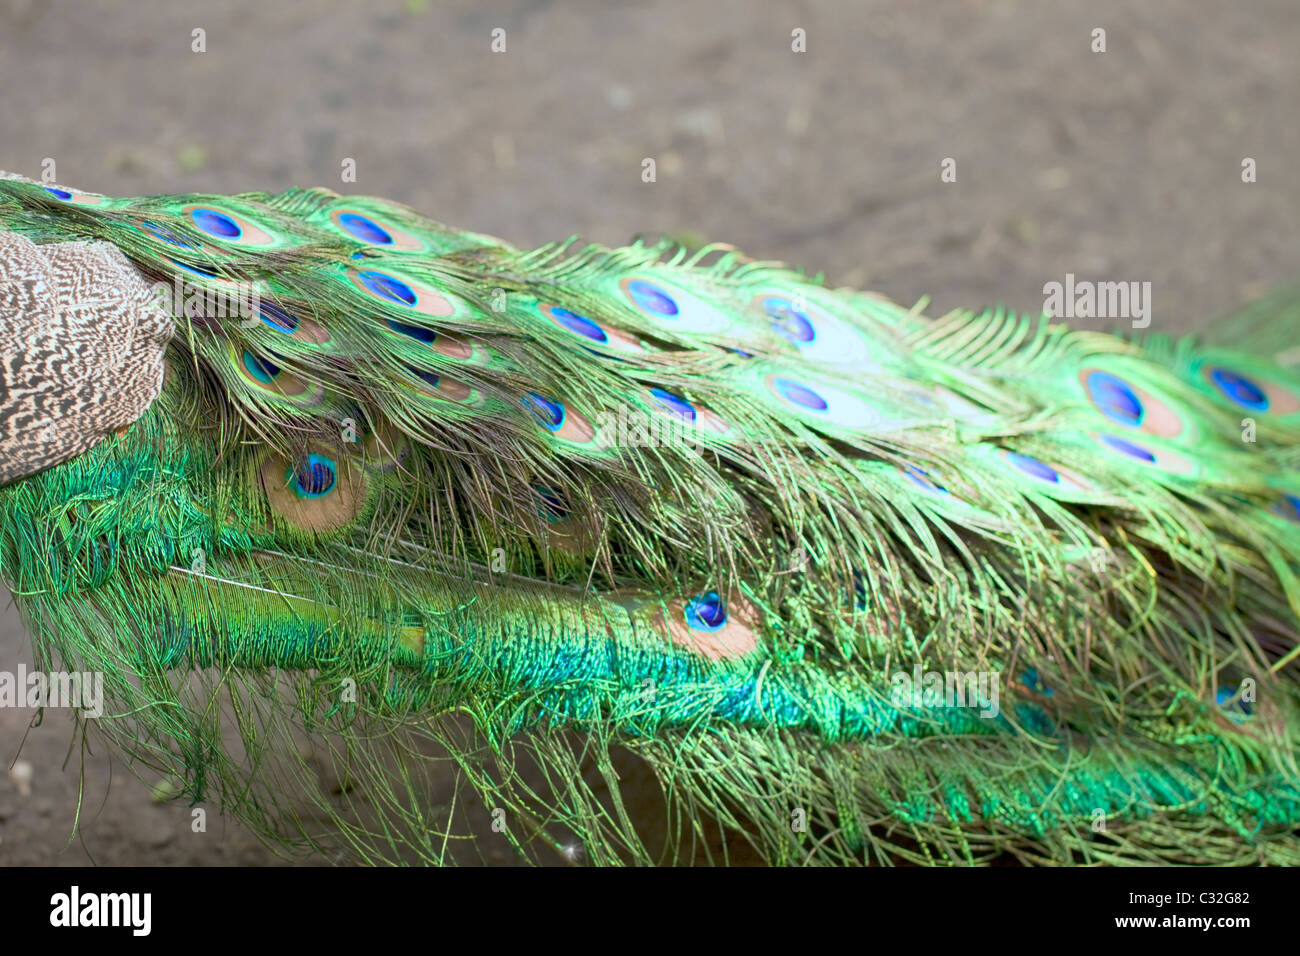 A peacock's tail folded Stock Photo